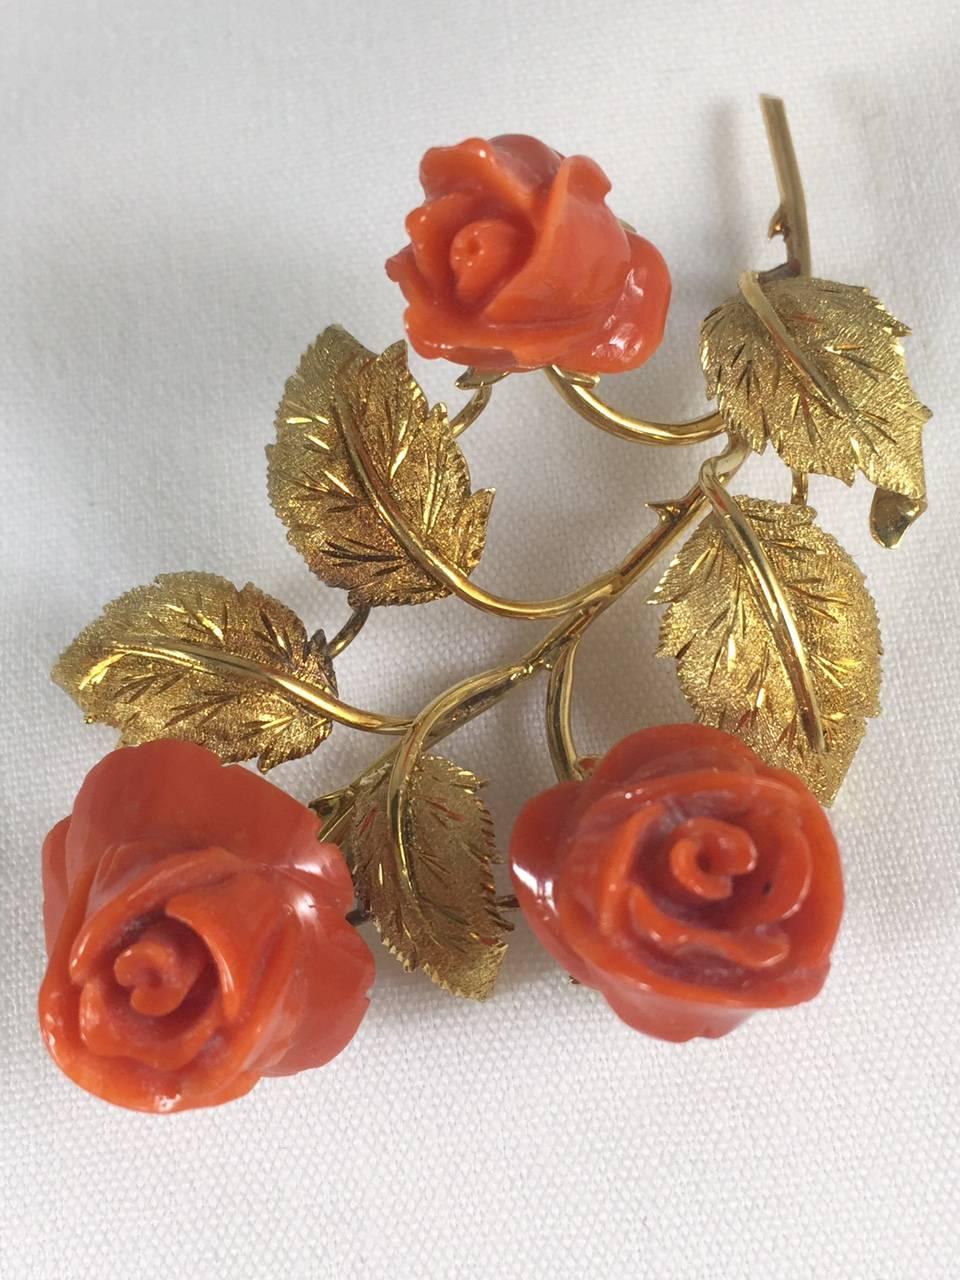 What could be more beautiful than hand carved Roses in natural red Mediterranean coral?  So lifelike they appear to bloom before your eyes!
Meticulously crafted in 18 karat yellow gold. A lifelike stem even has thorns and beautiful engraved,